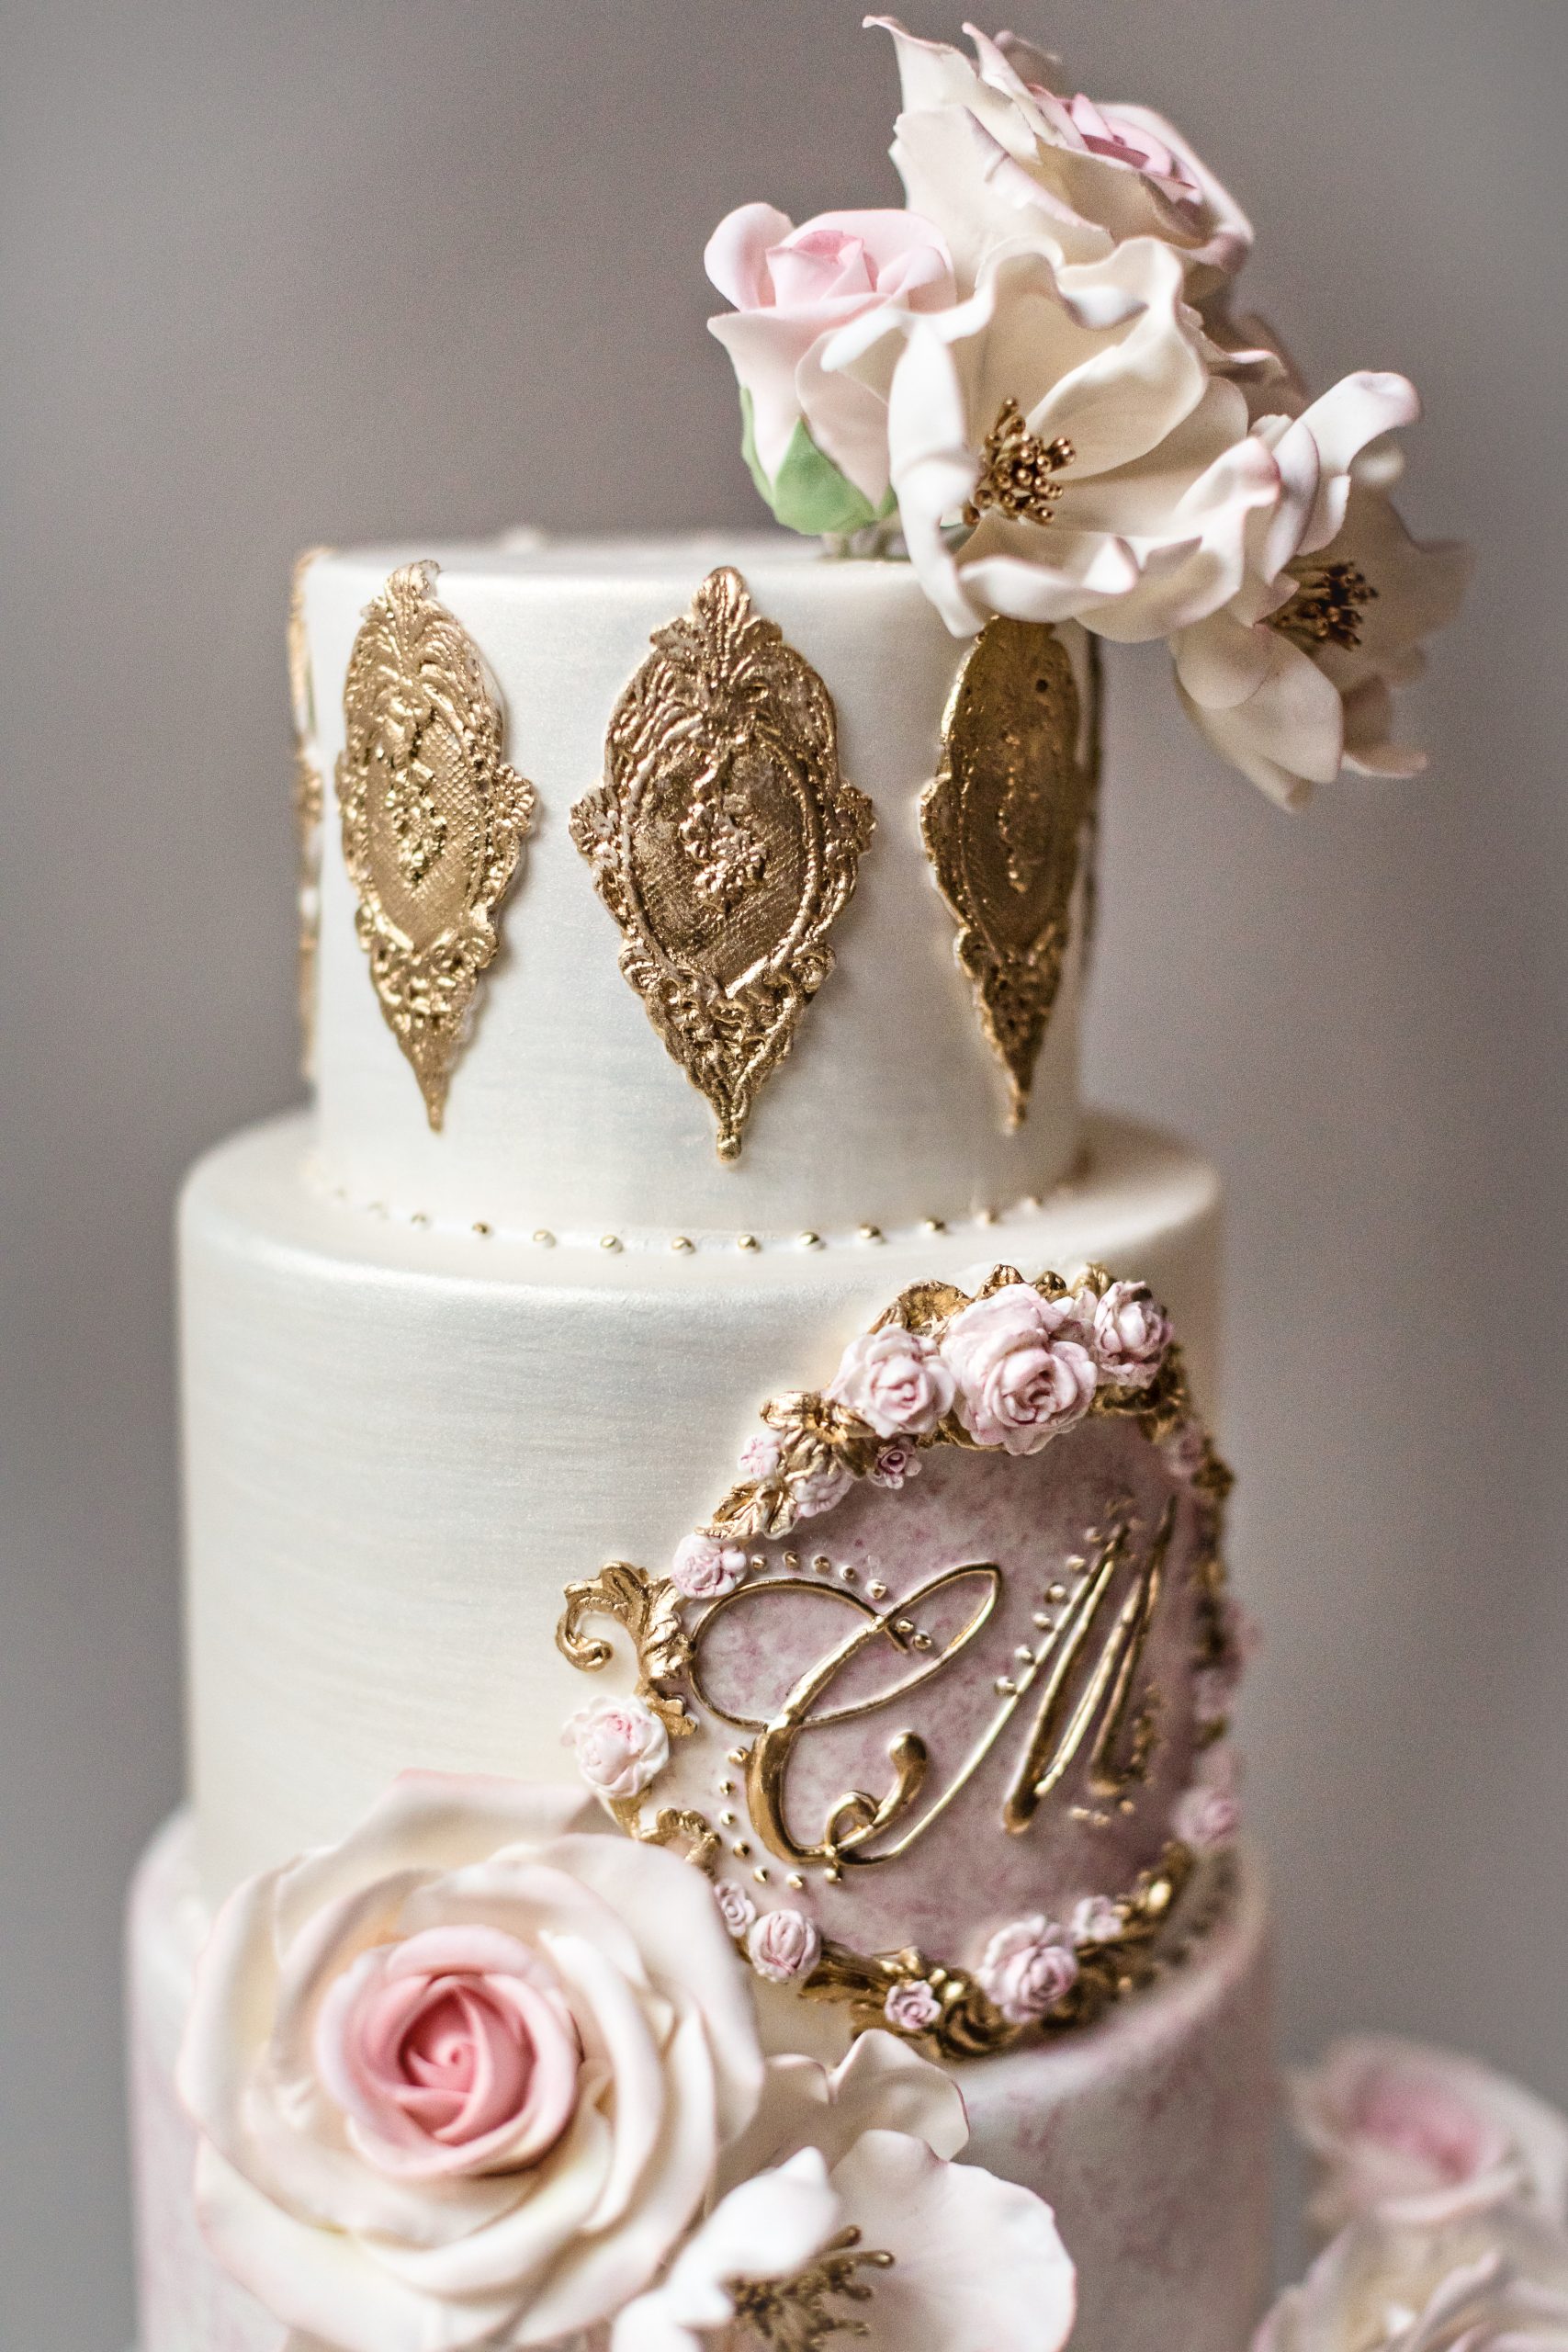 Amazing Vintage Custom Wedding Cake featuring gold lace and white and pink handcrafted sugar flowers. Luxury Wedding Cake by Master Sugar Artist Ana Parzych. CT, NYC, MA, RI.